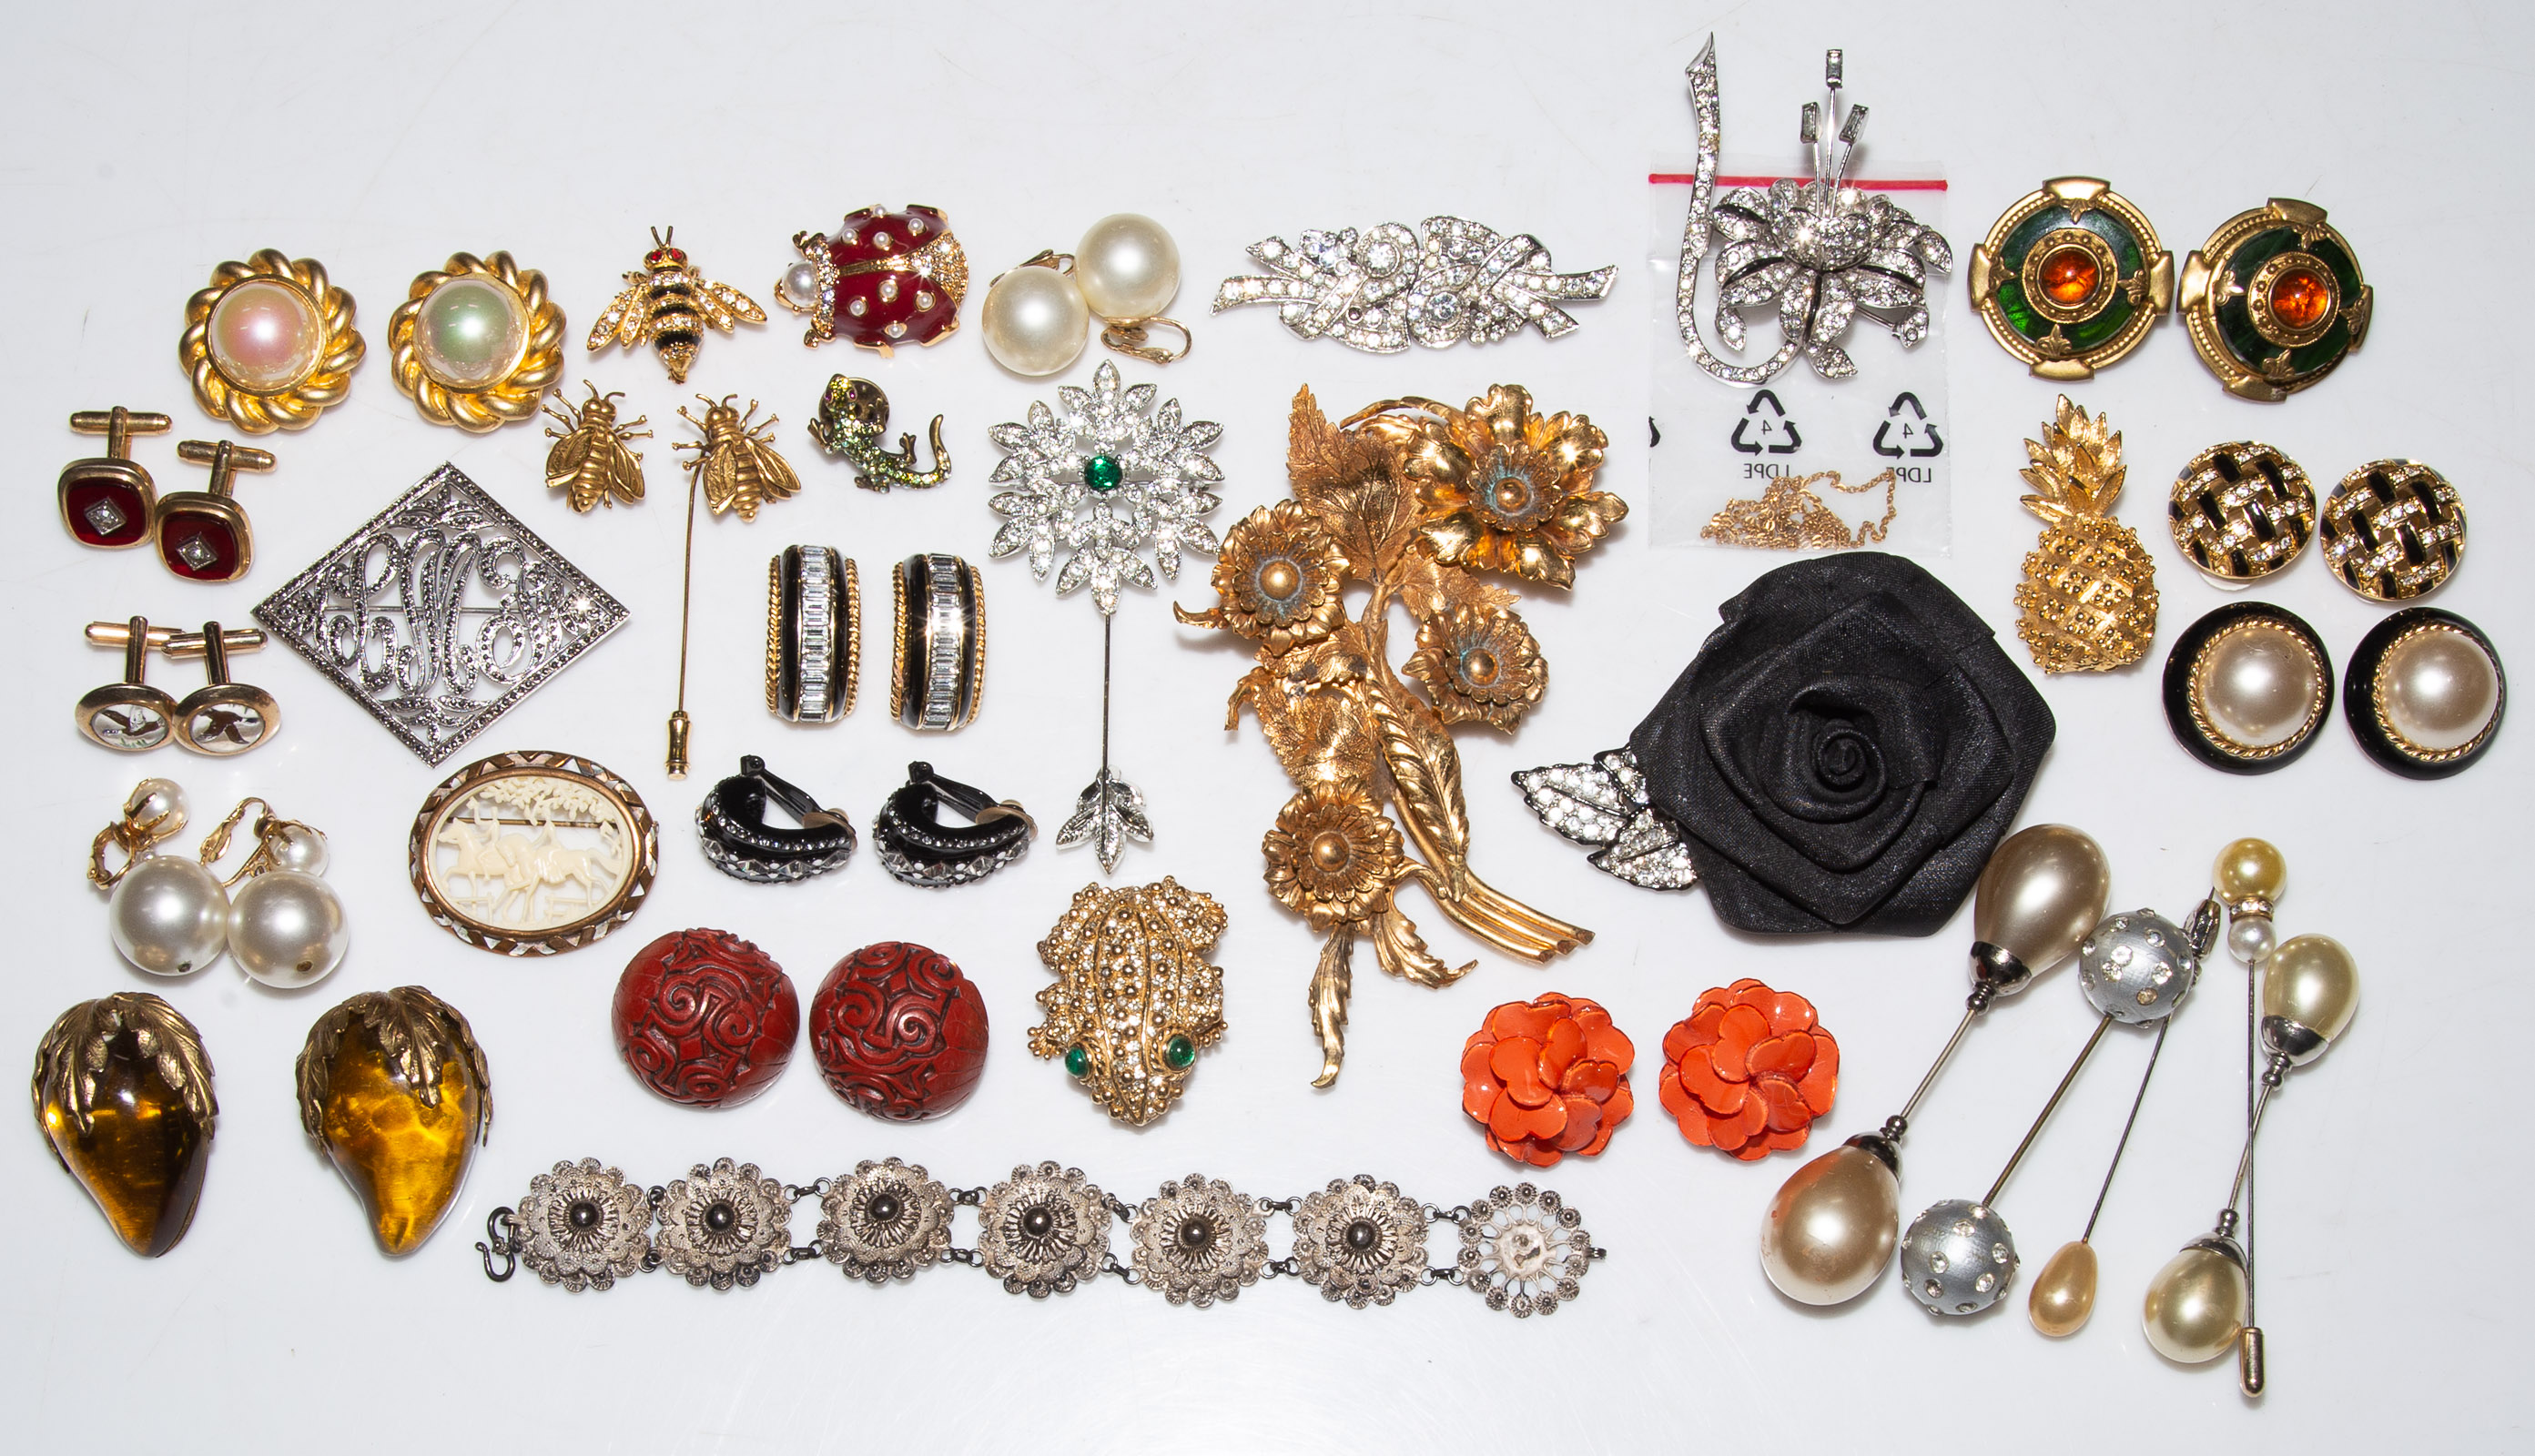 A COLLECTION OF VINTAGE JEWELRY & FASHION